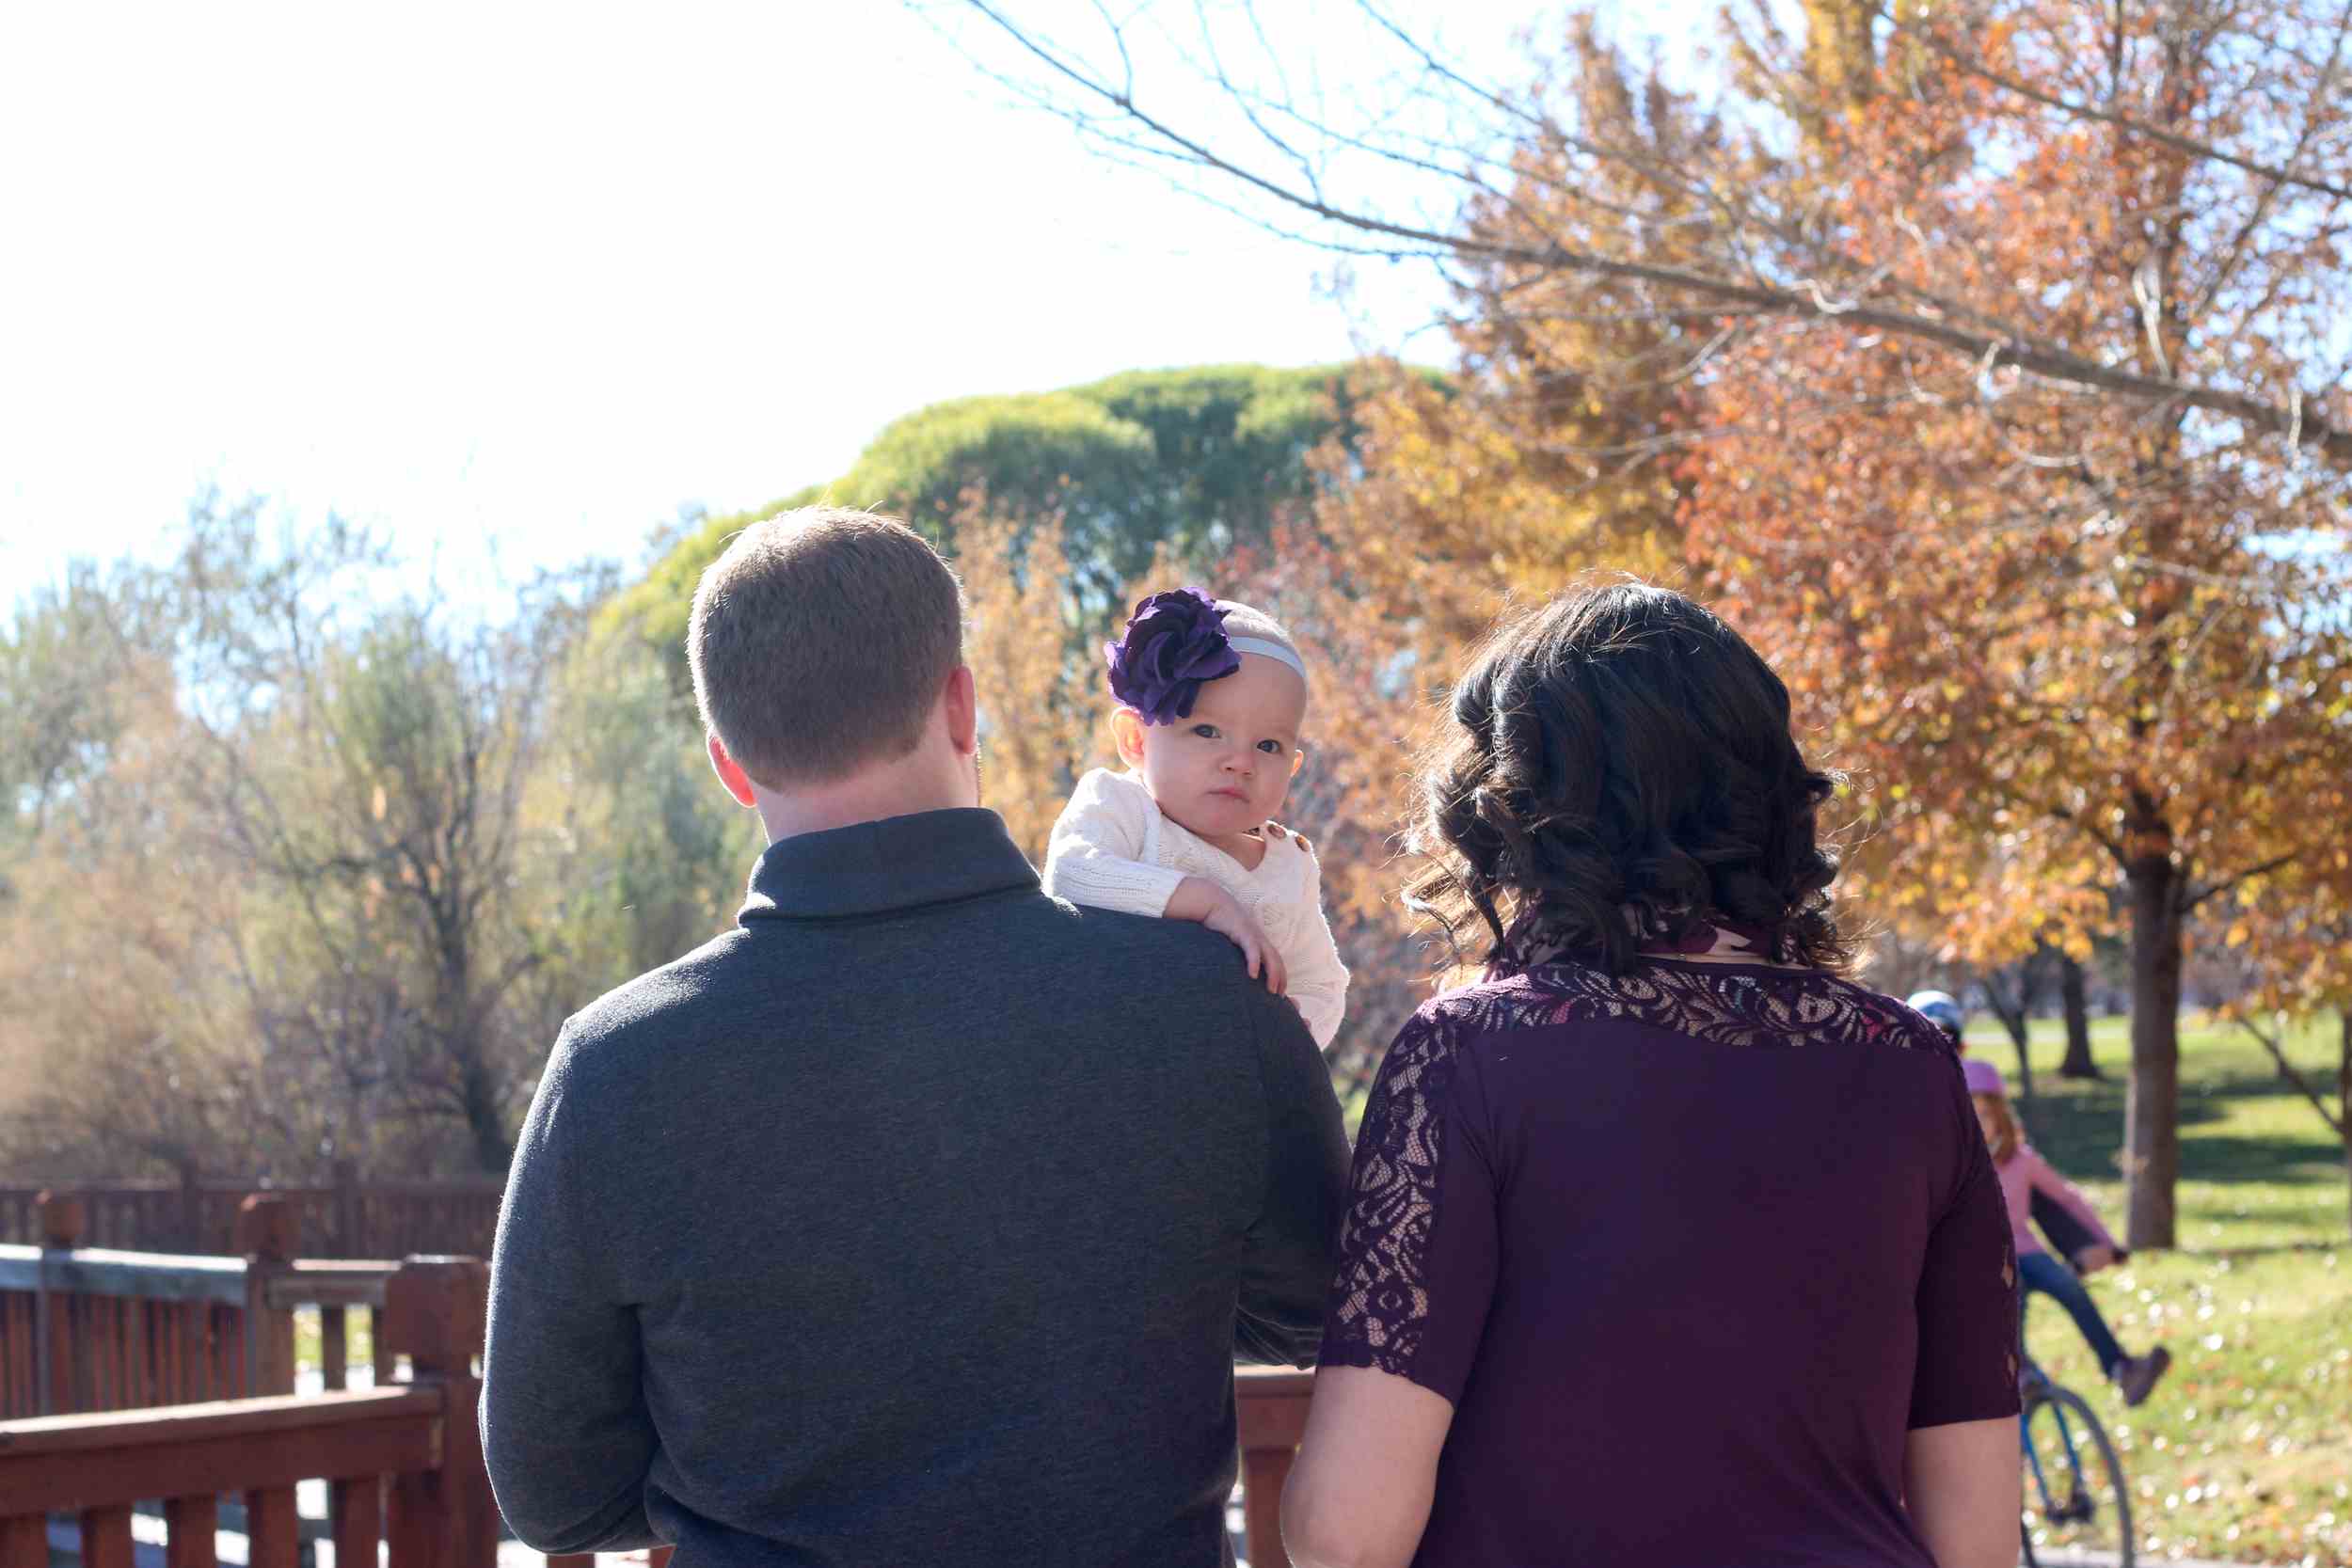 Family Photoshoot in Utah by Captured by Lexi